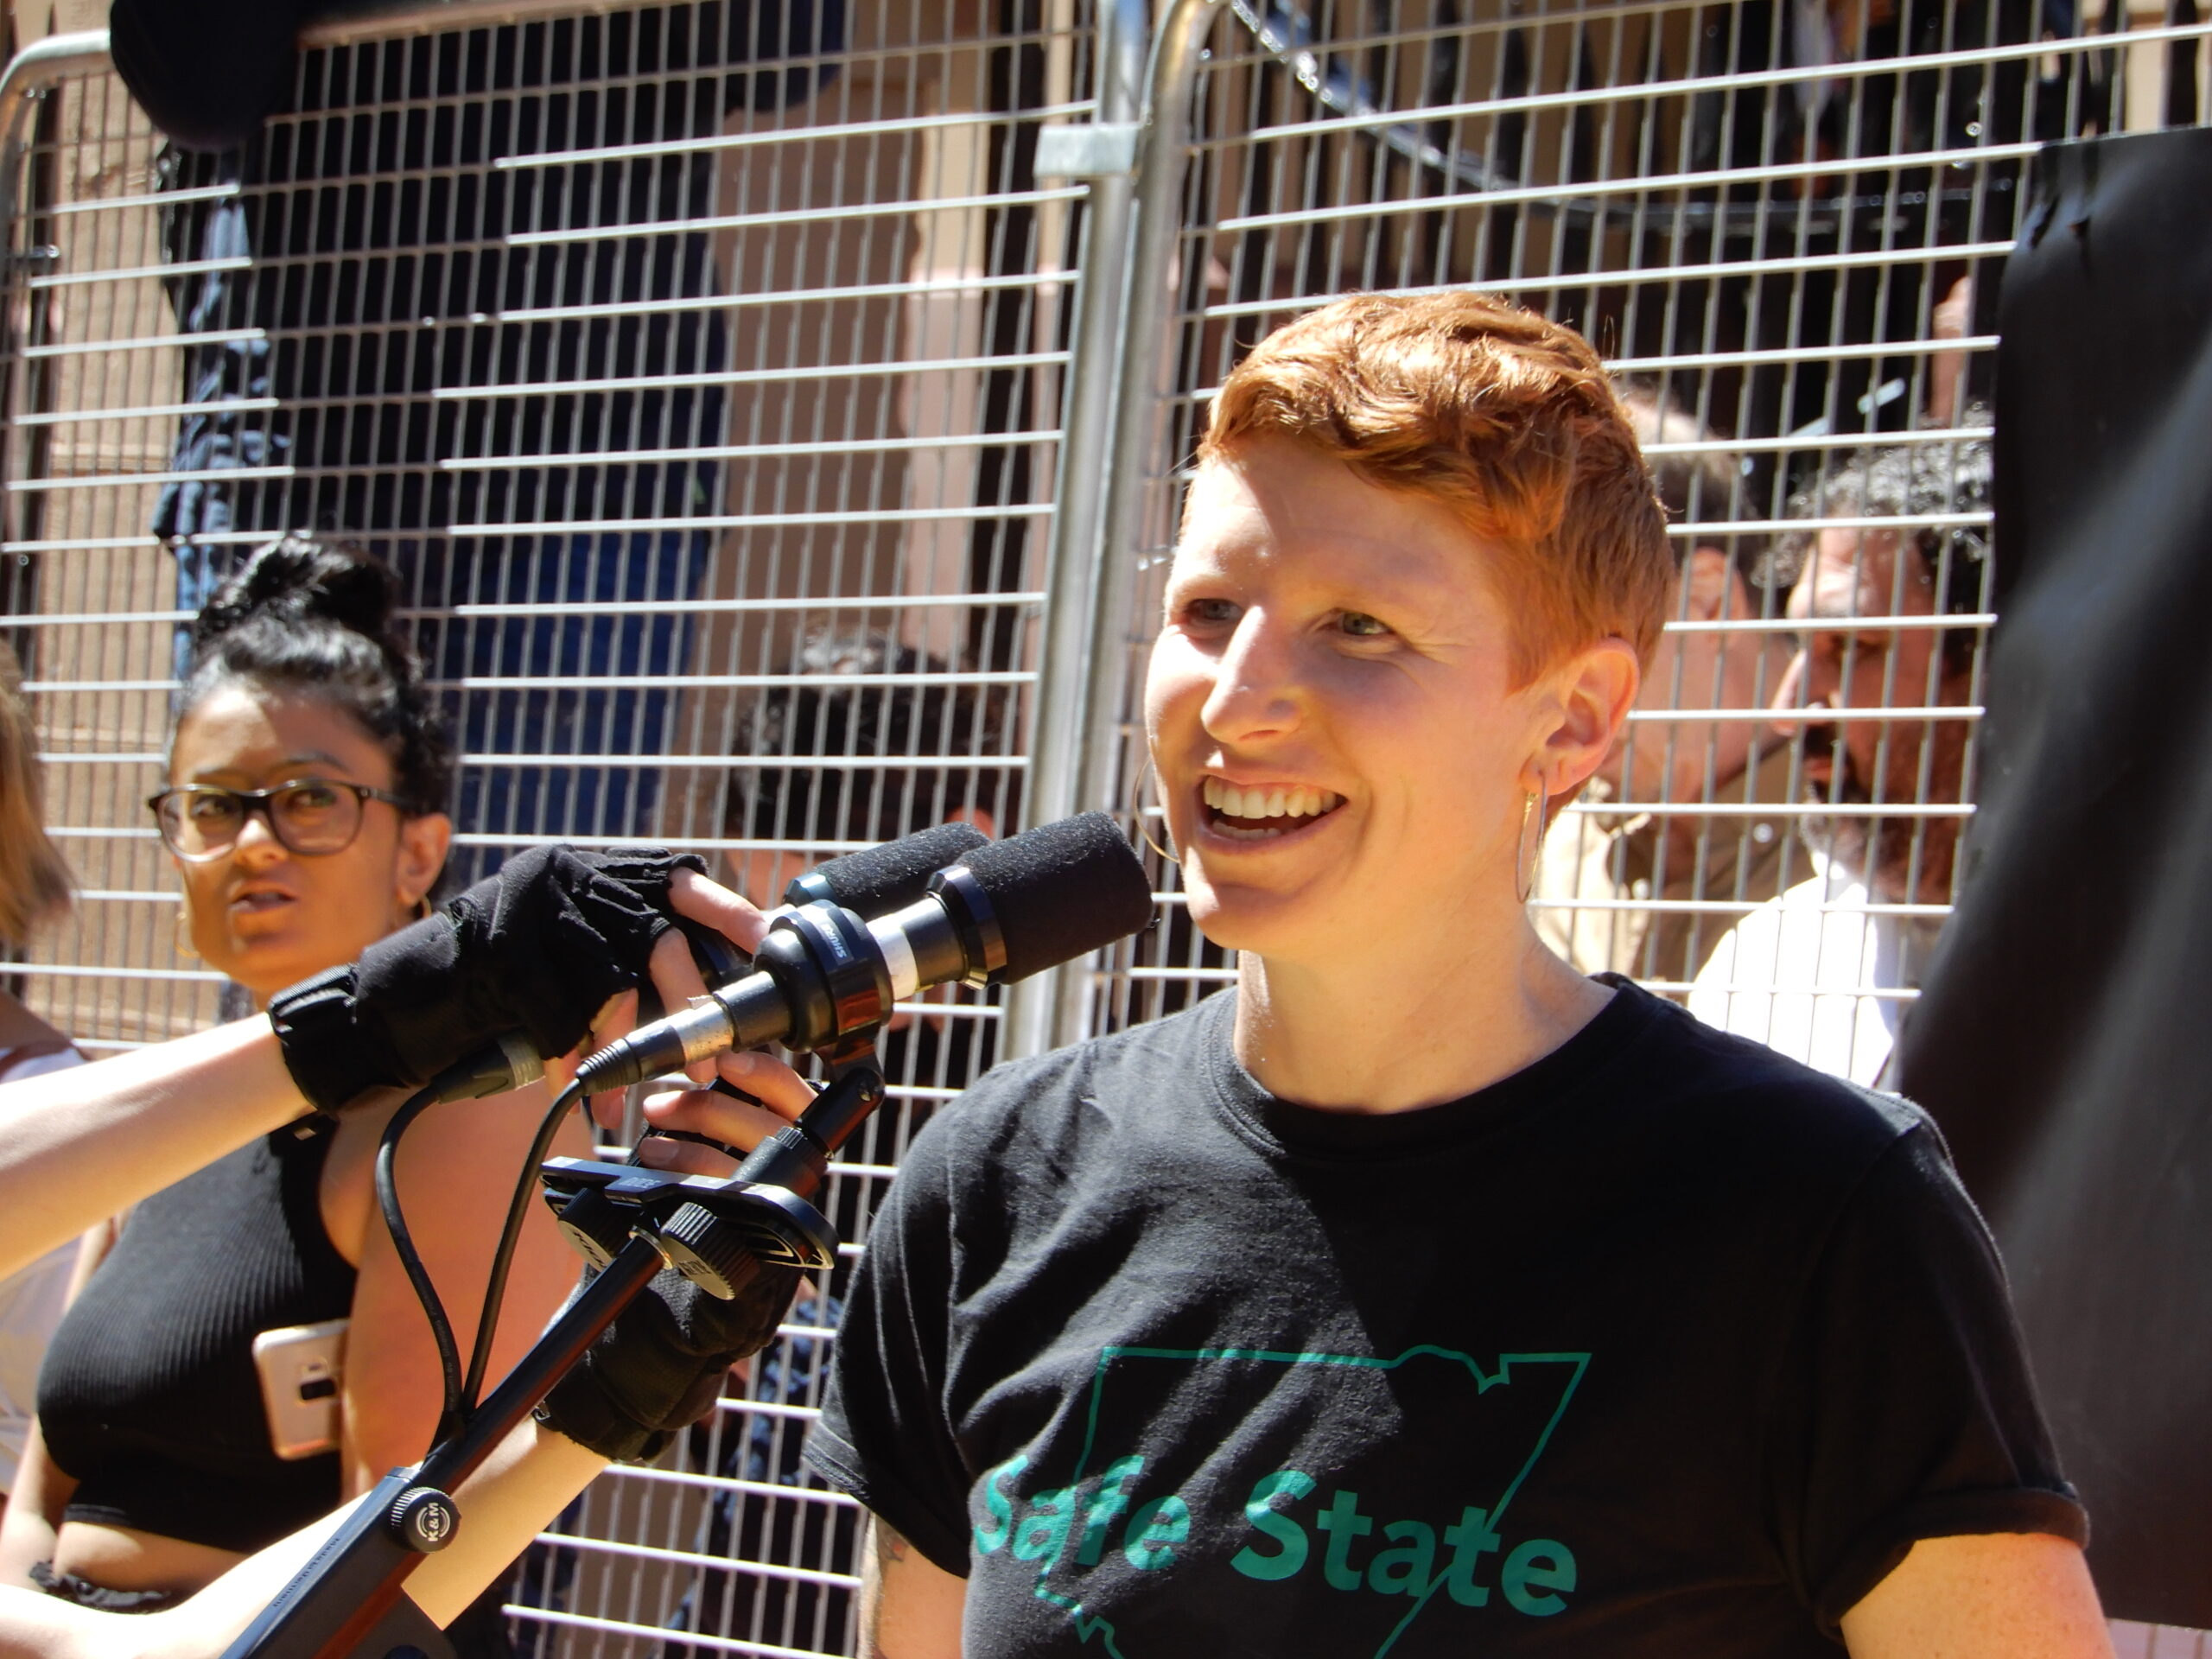 DVNSW’s Renata Field addresses the March for Justice rally 15 March 2021